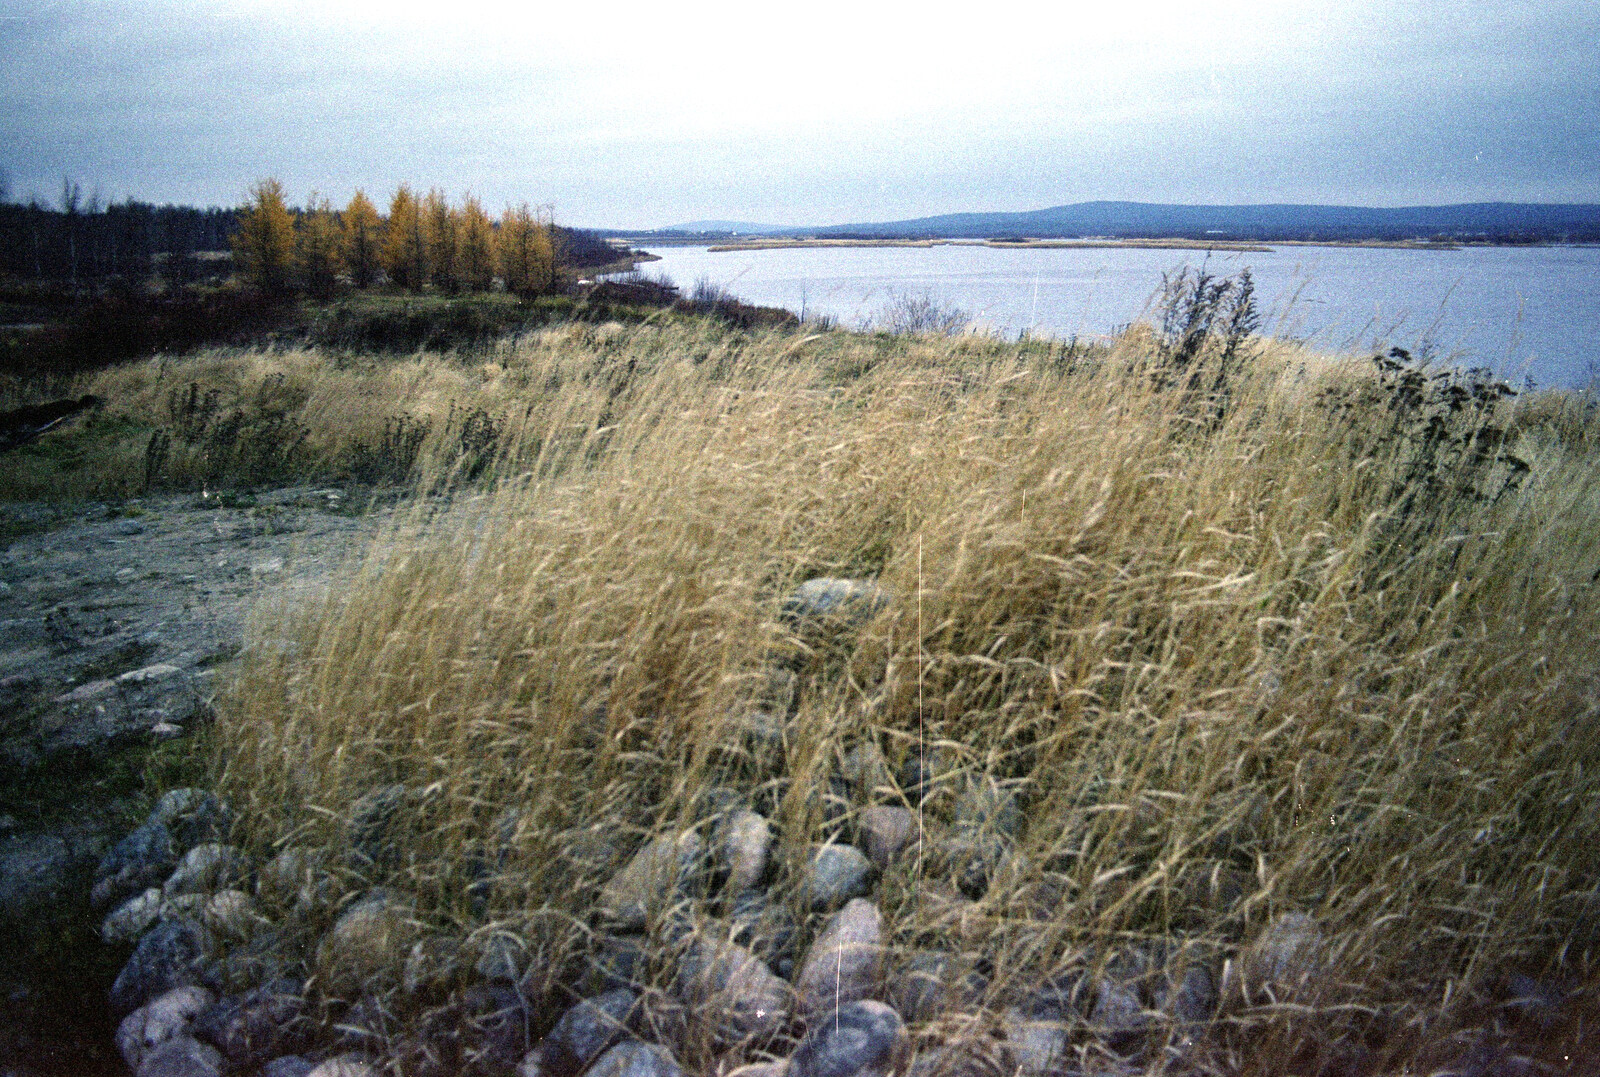 A Finnish lake scene from A Trip to Rovaniemi and the Arctic Circle, Lapland, Finland - 28th November 1999